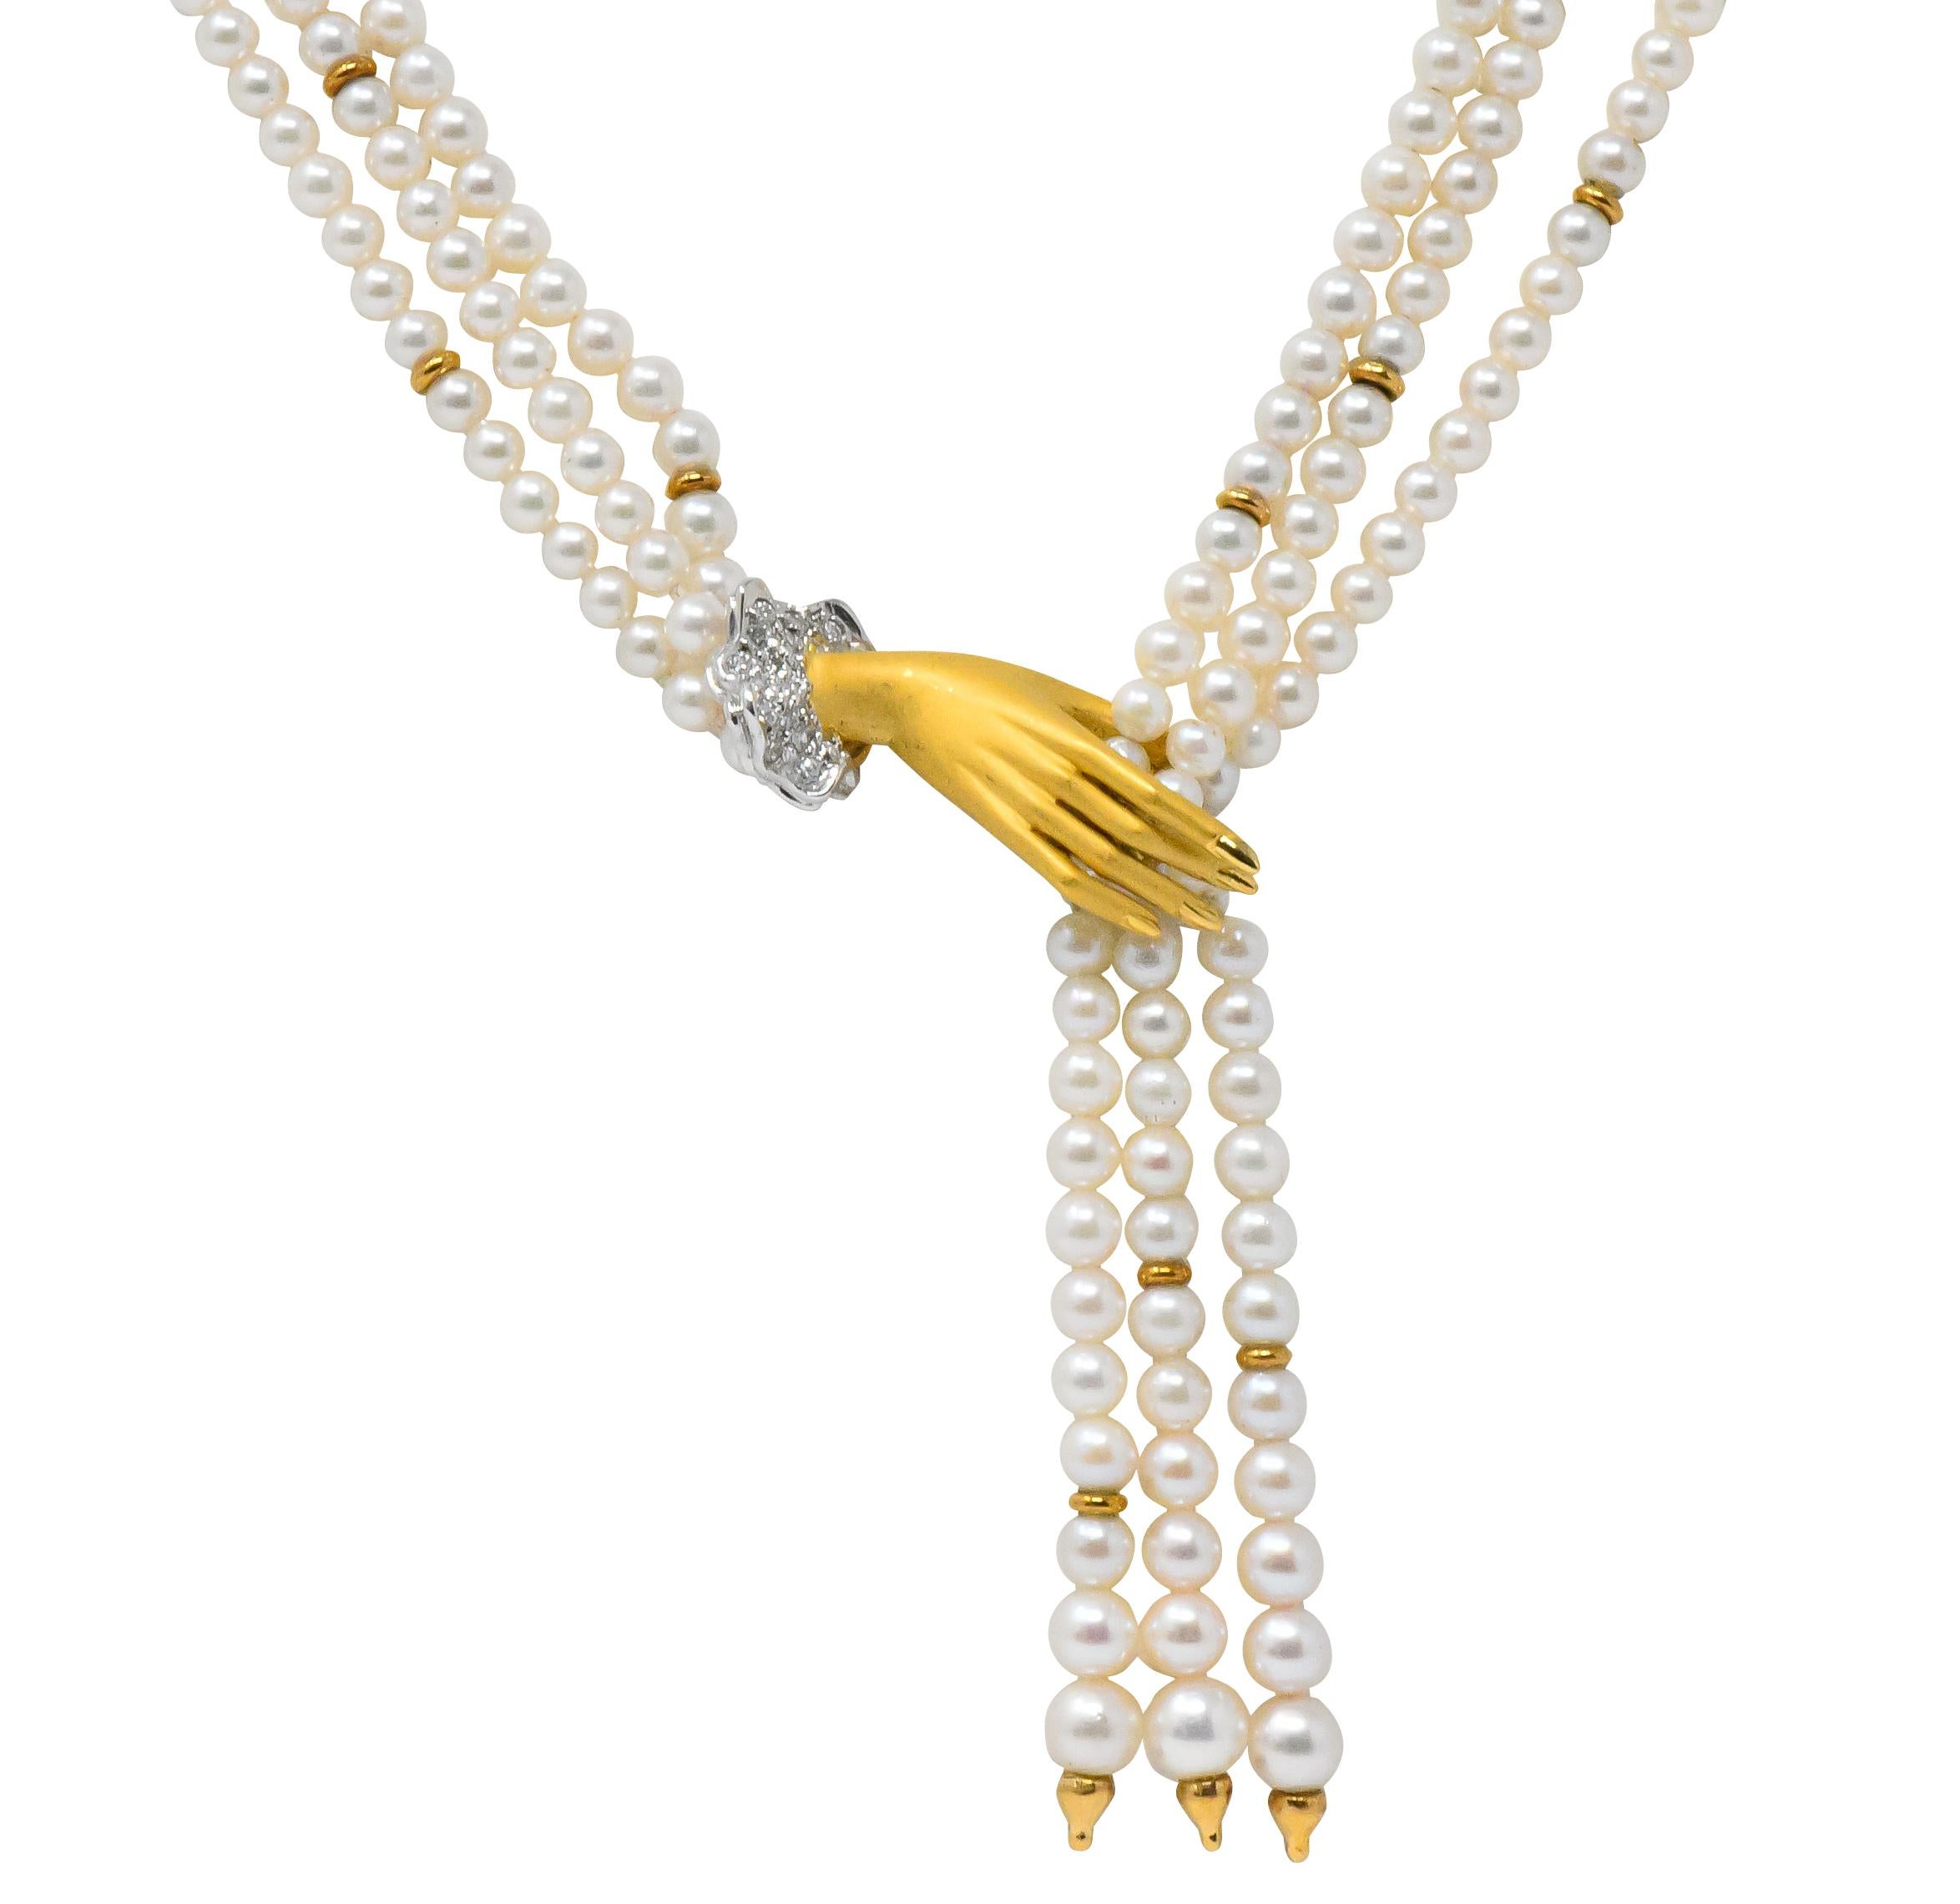 Multi-strand, freshwater natural pearl tassel necklace with 18 karat gold stations, gathered in a golden hand

Cuff accented by round brilliant cut diamonds set in white gold, weighing 0.30 carats total, G/H color and VS clarity

Completed by